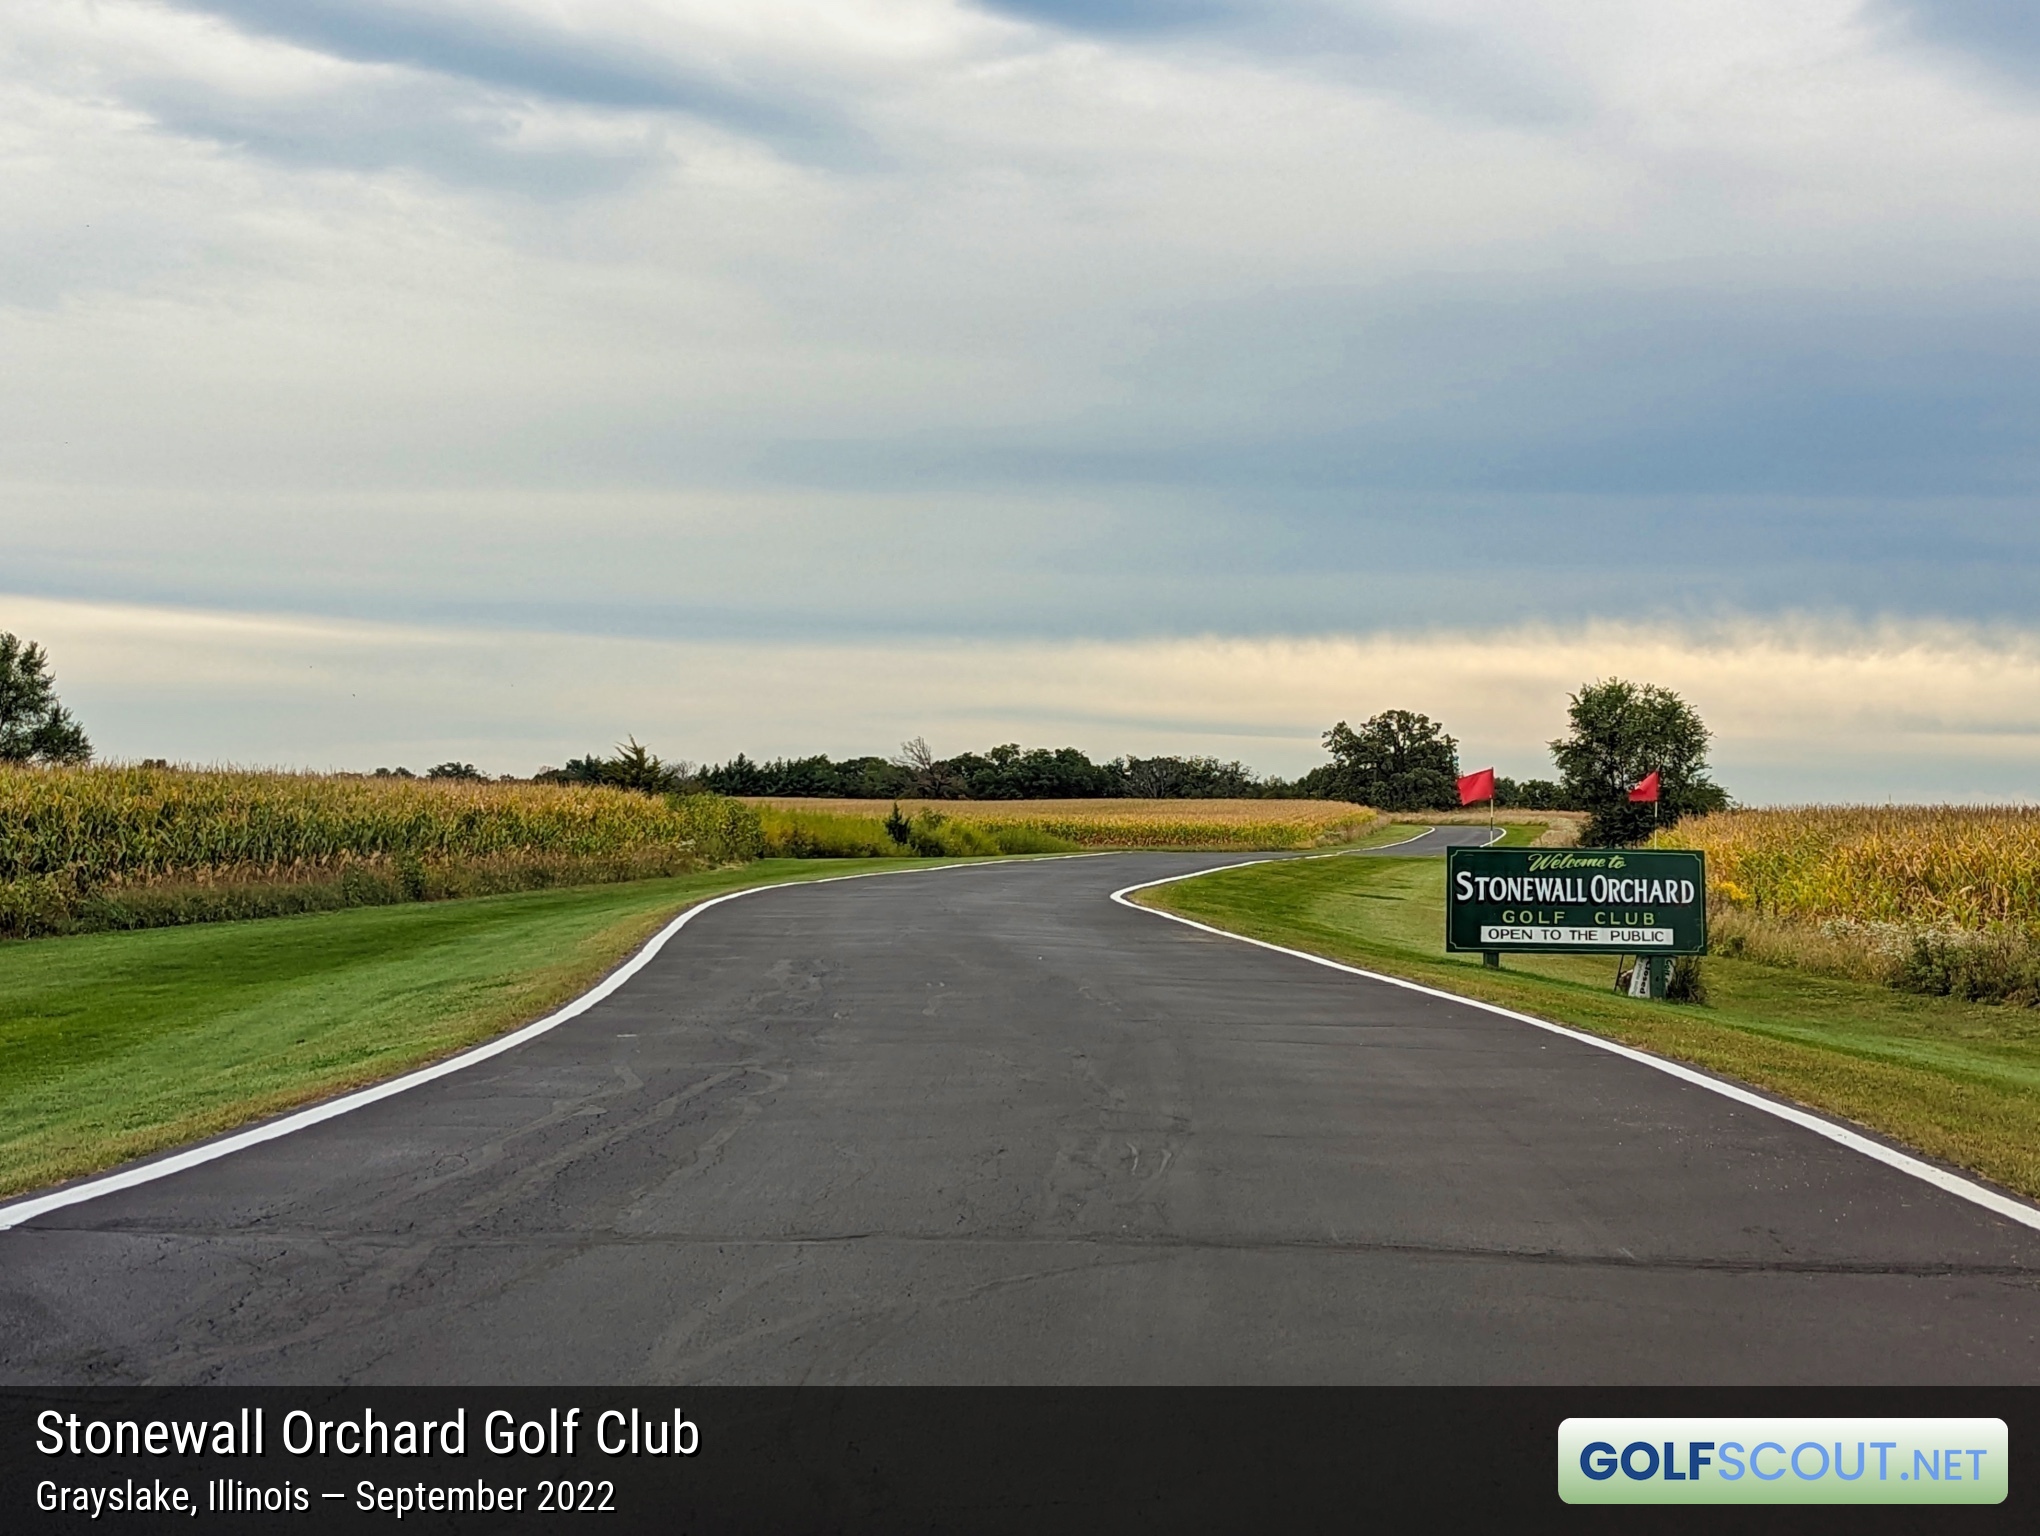 Miscellaneous photo of Stonewall Orchard Golf Club in Grayslake, Illinois. The entrance to Stonewall Orchard is a very long driveway cutting through corn fields that sets the stage for the round to come.